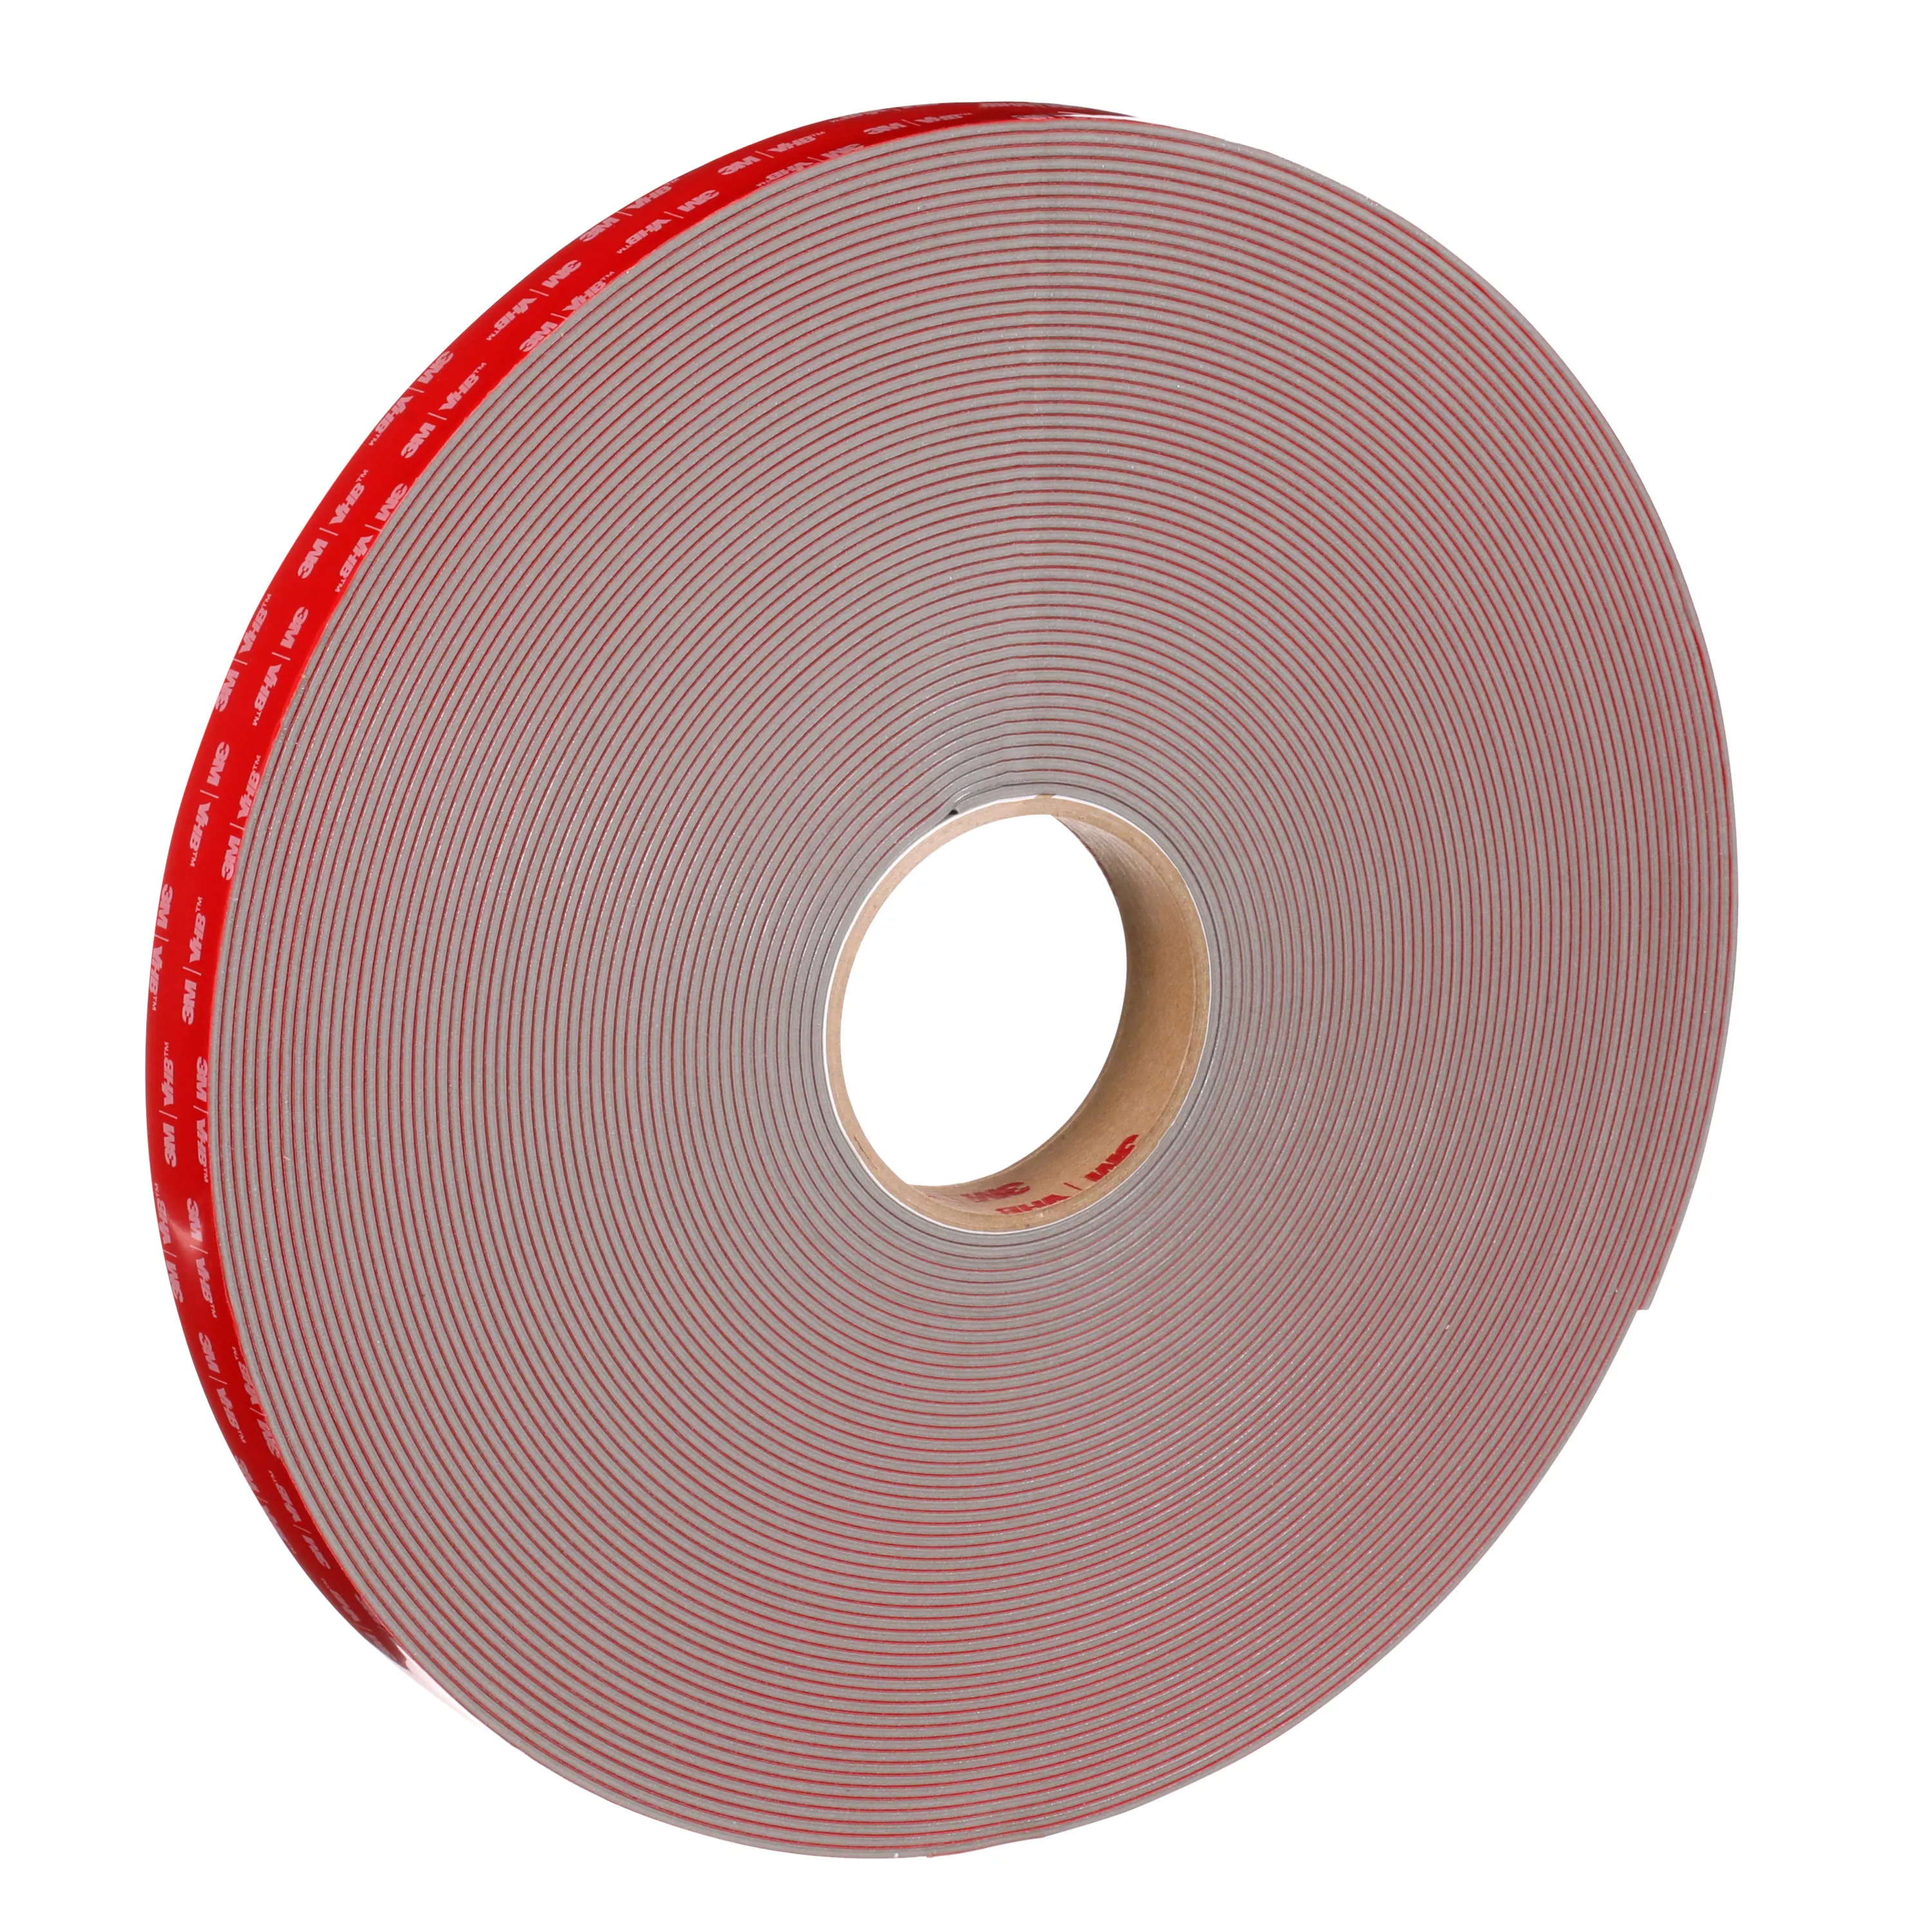 Product Number 4941 | 3M™ VHB™ Tape 4941